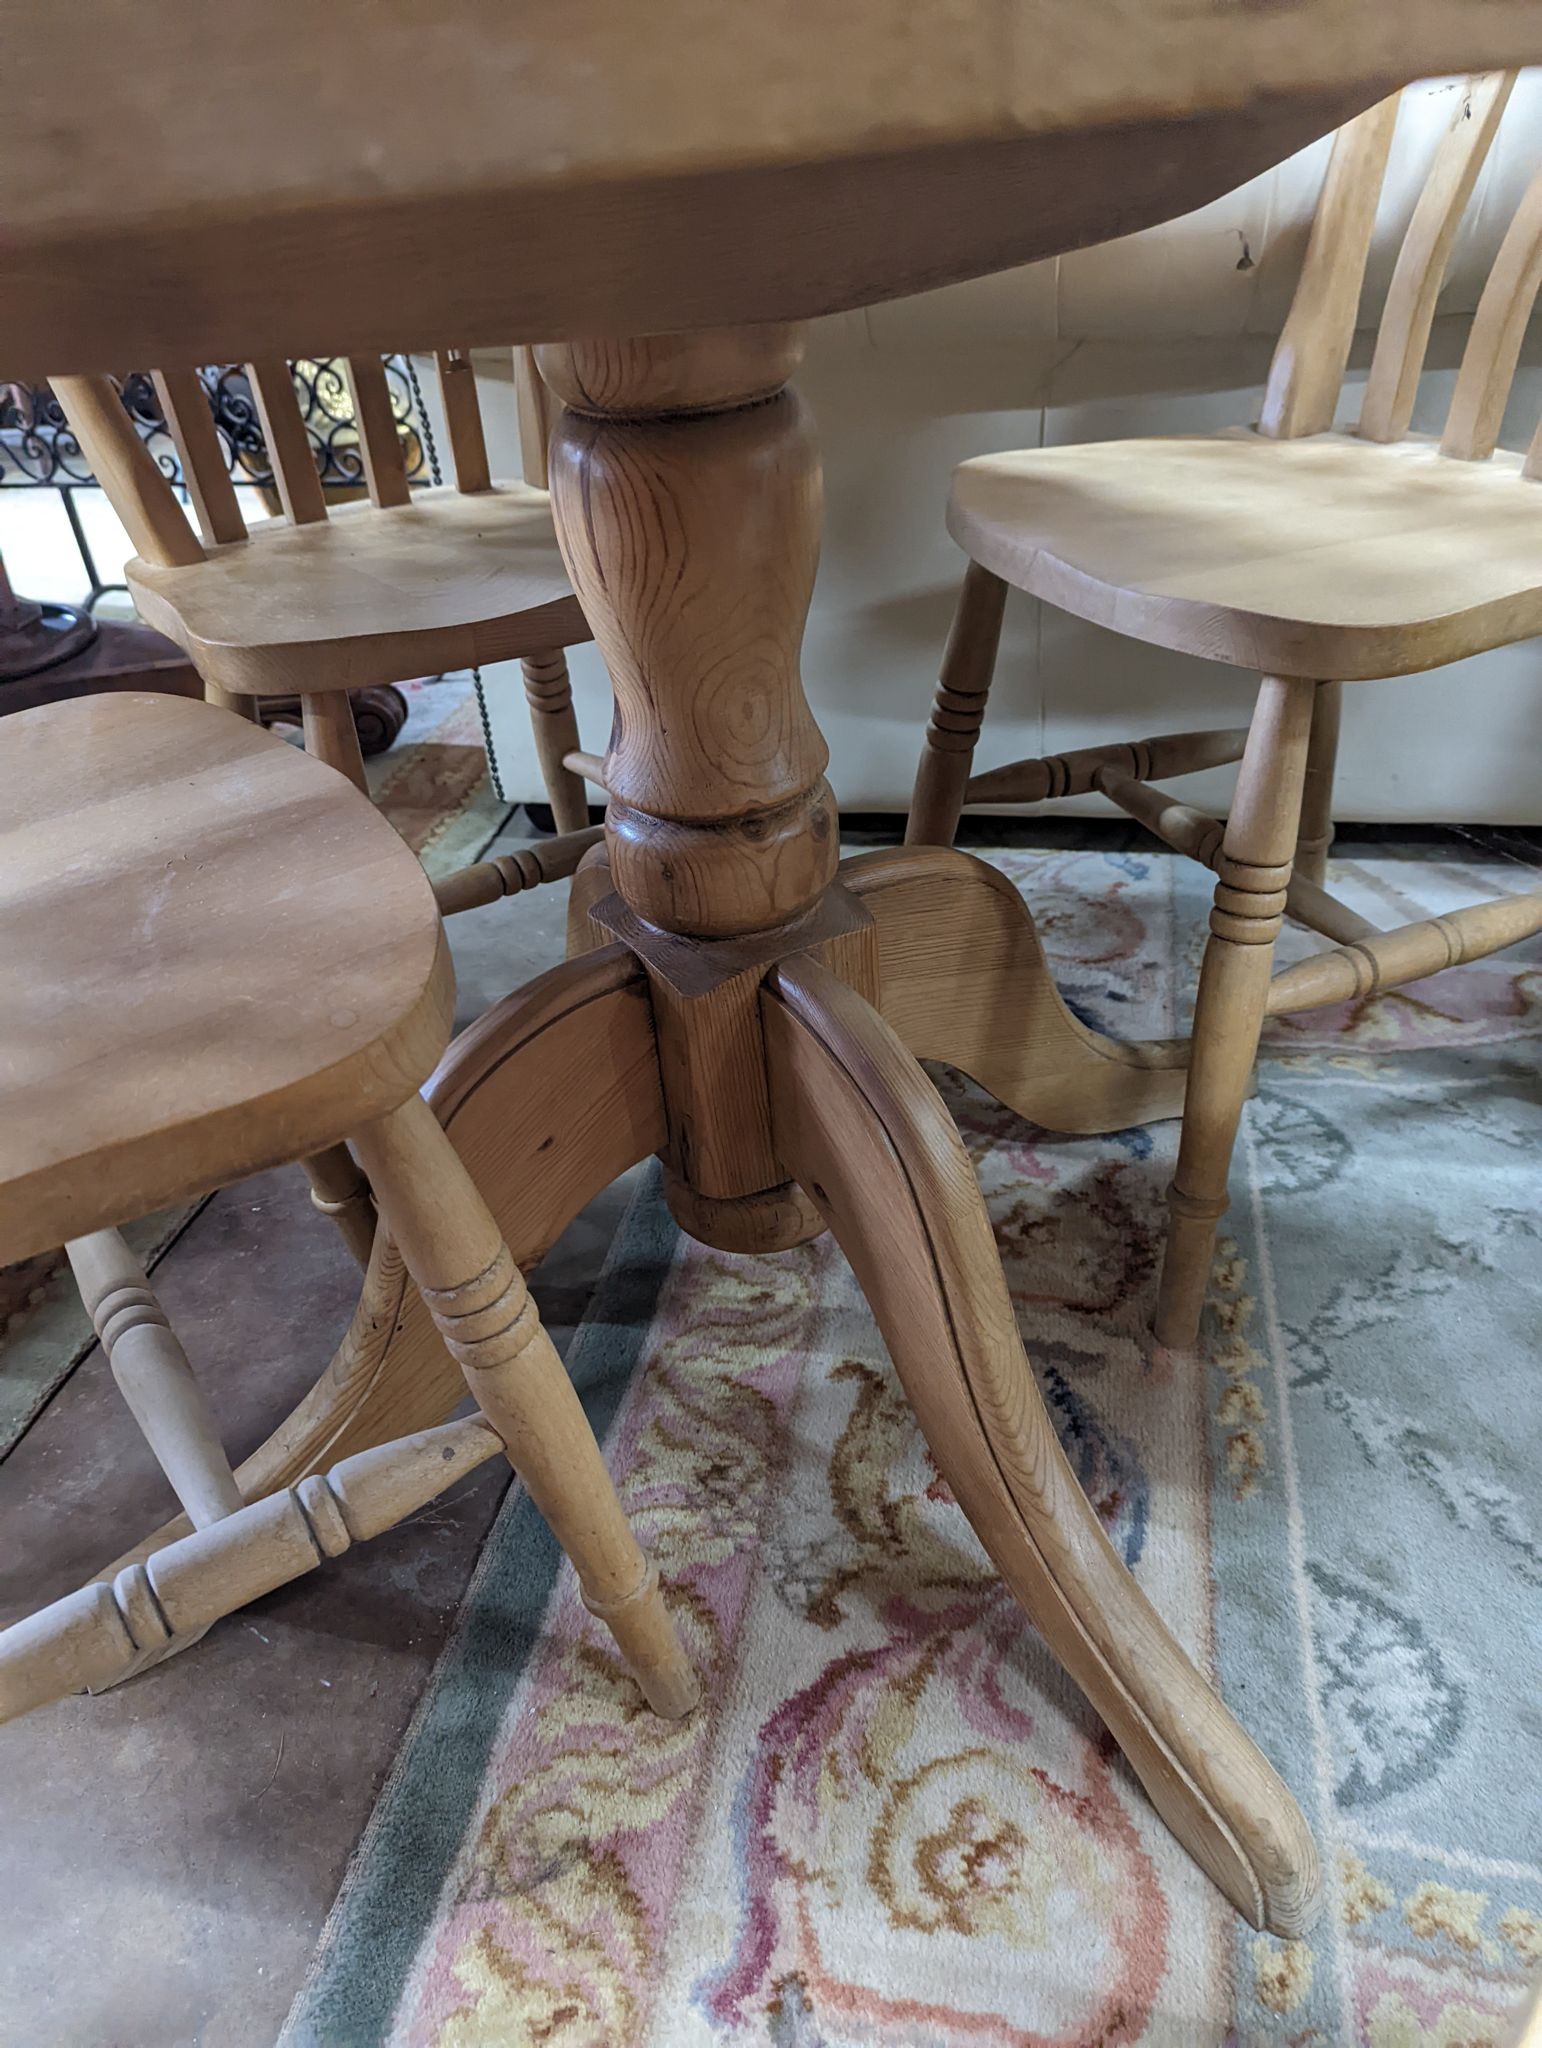 A Victorian style circular pine breakfast table, diameter 105cm, height 74cm, together with four Victorian style beech lathe back kitchen chairs